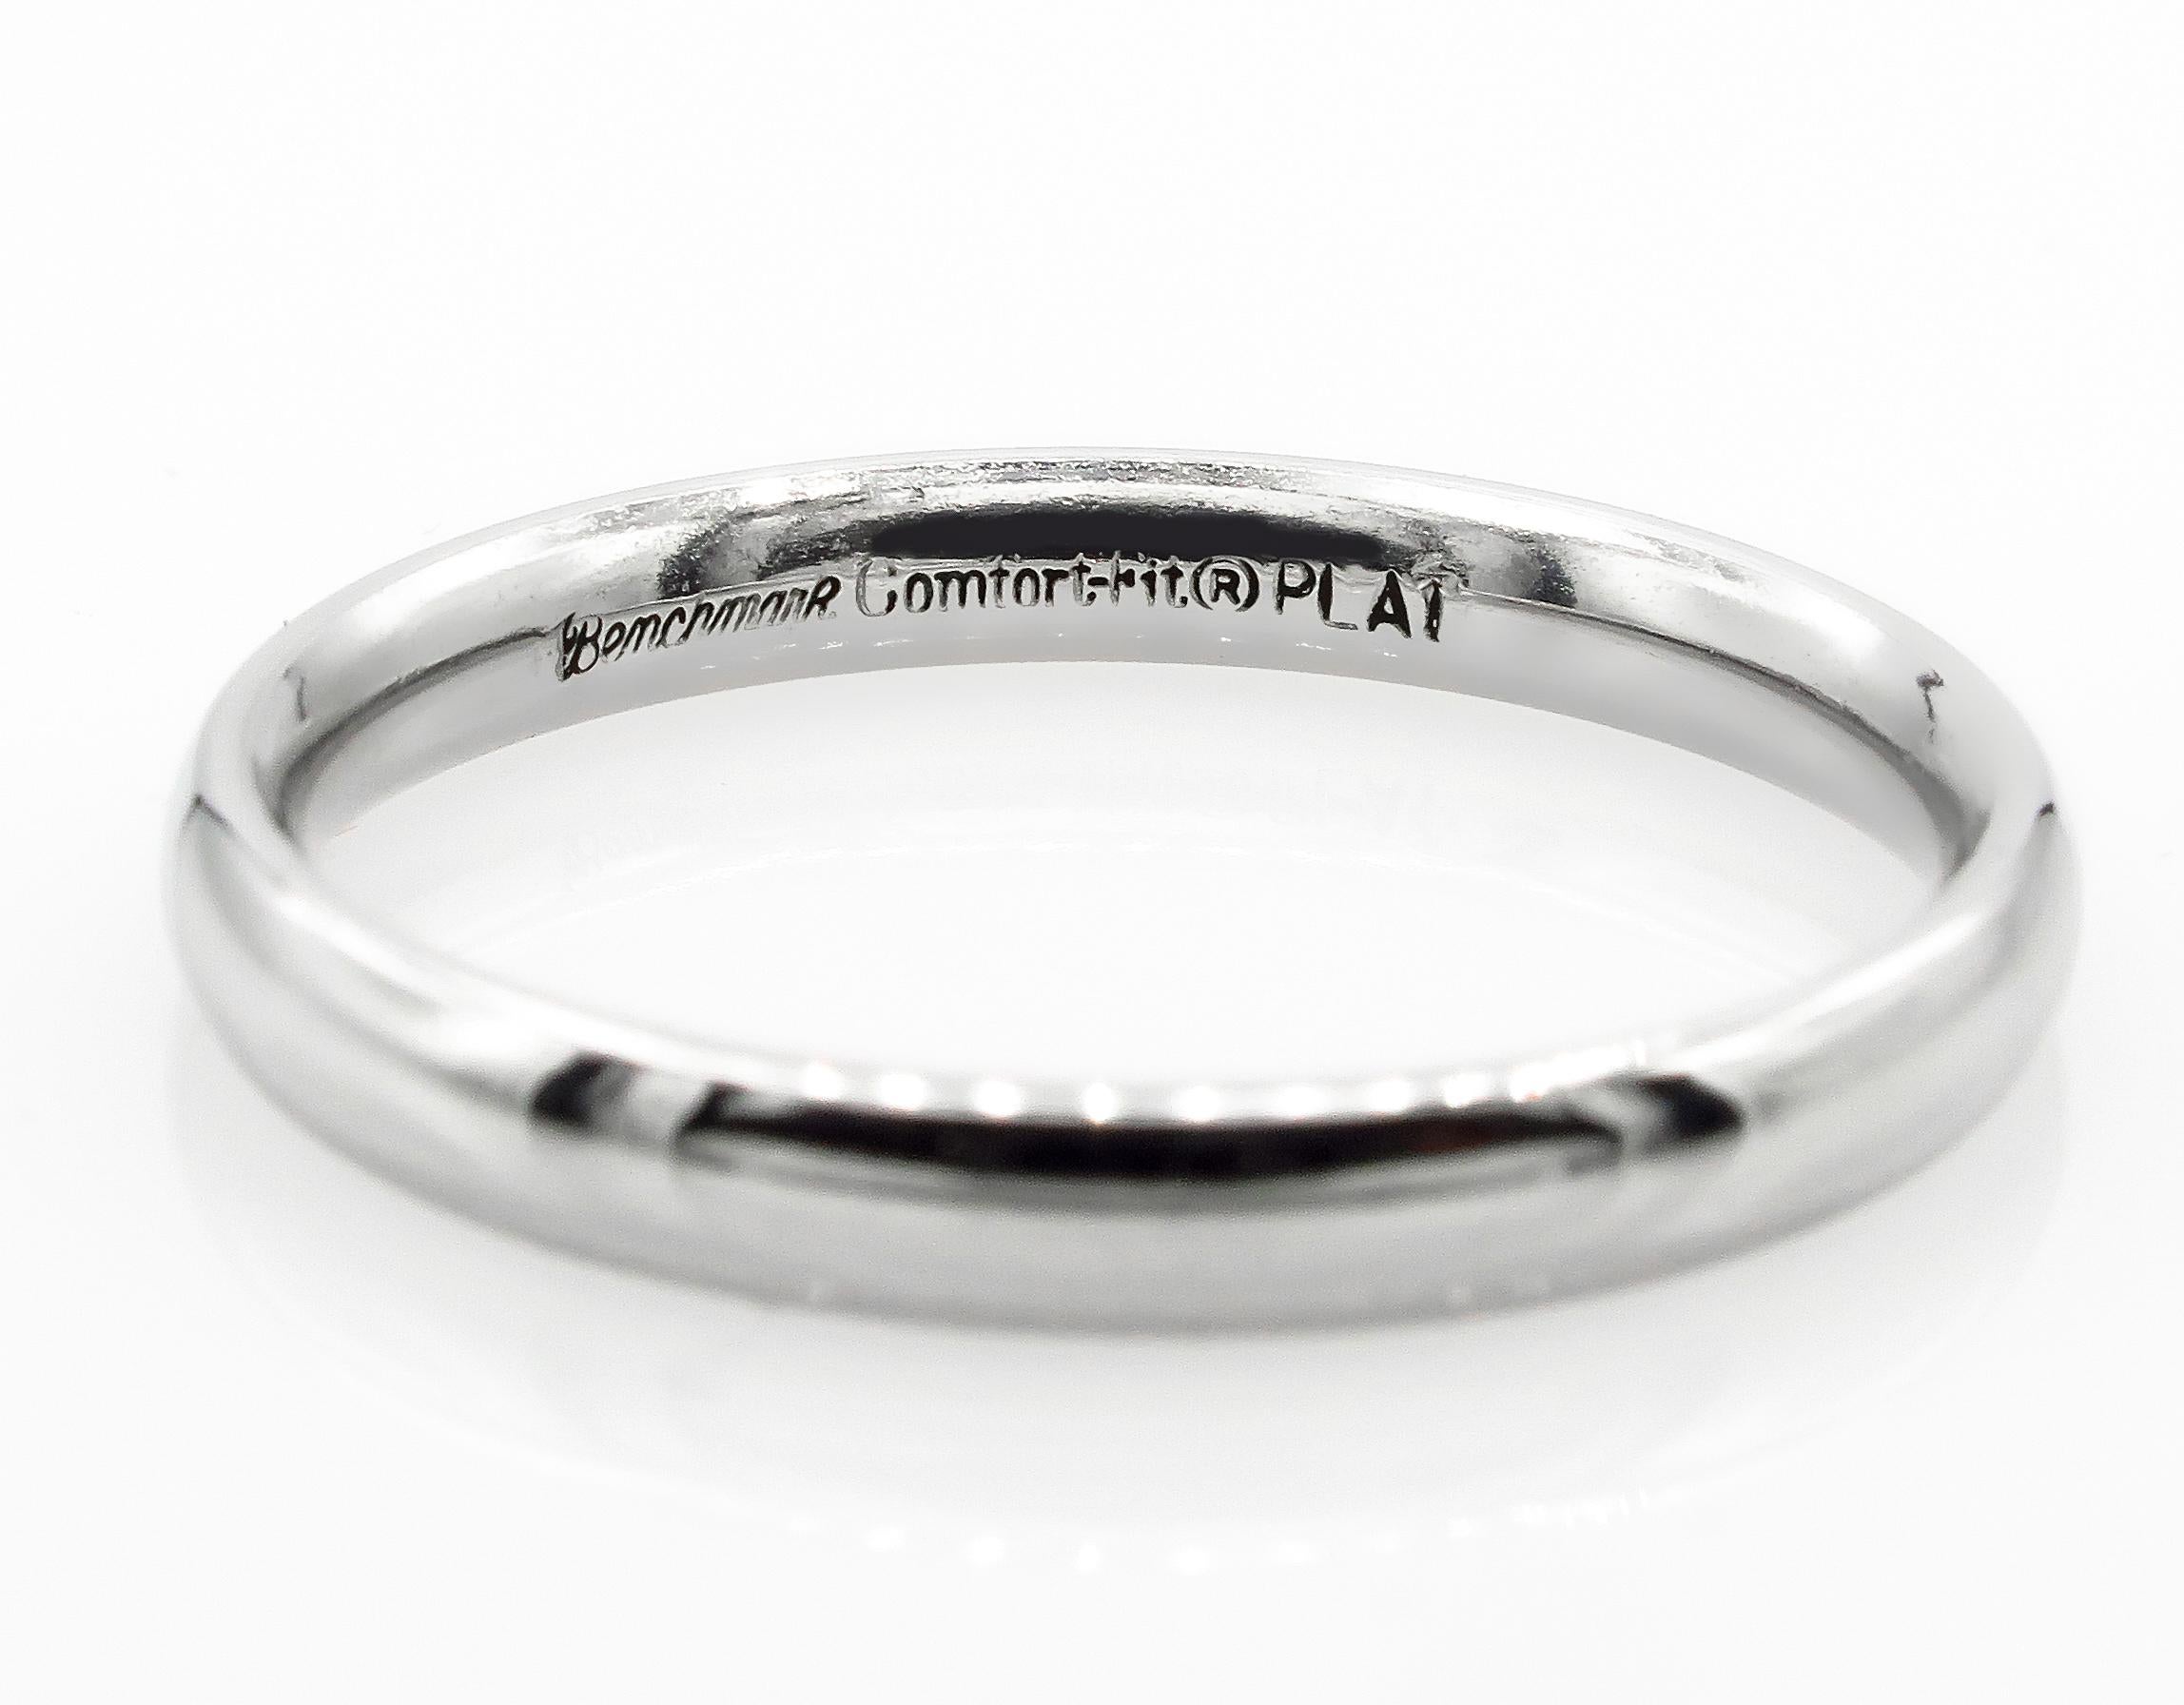 Benchmark Solid Platinum 950 Plain Wedding Band Ring Comfort Fit  In Excellent Condition For Sale In New York, NY